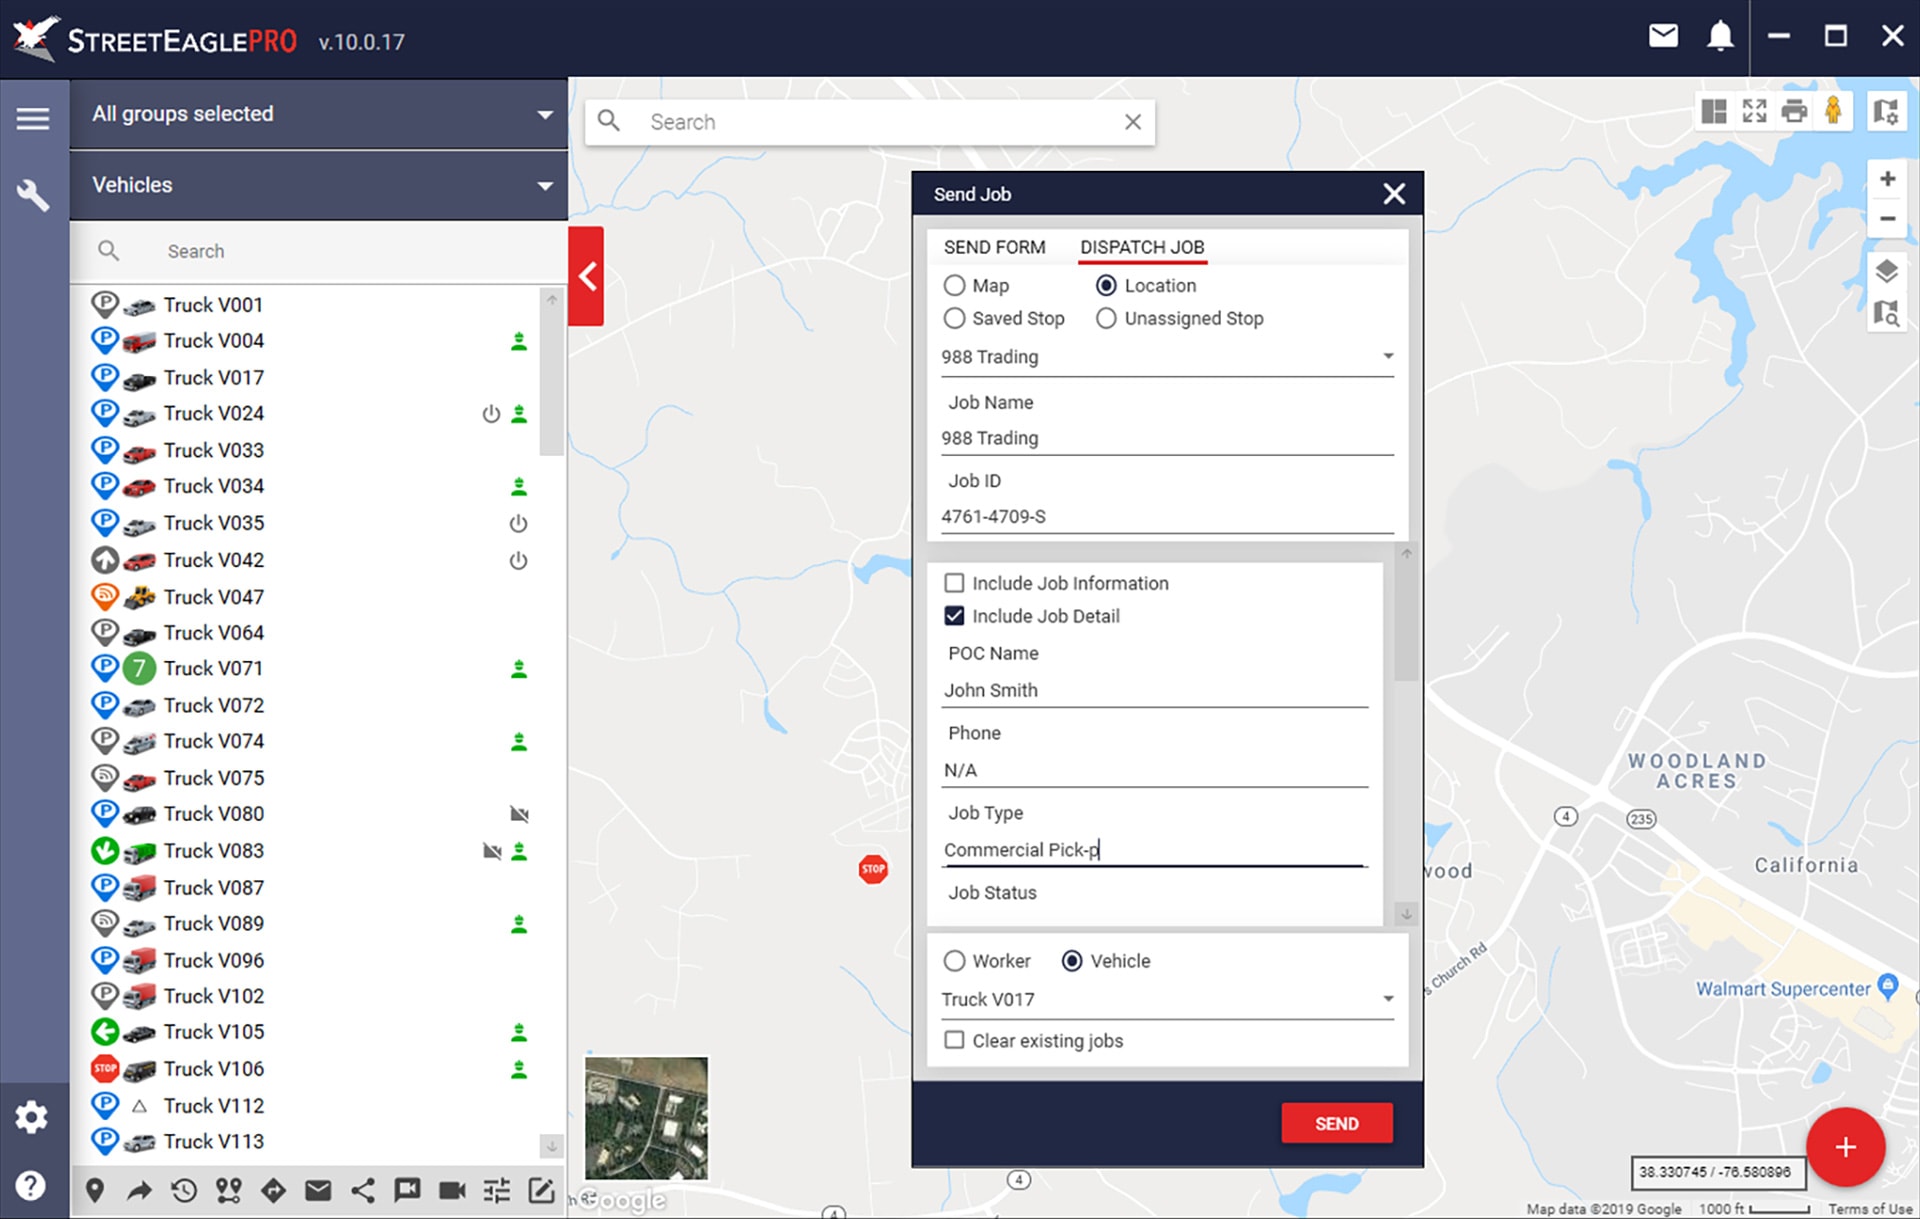 StreetEagle integrated with field service software allows job dispatch